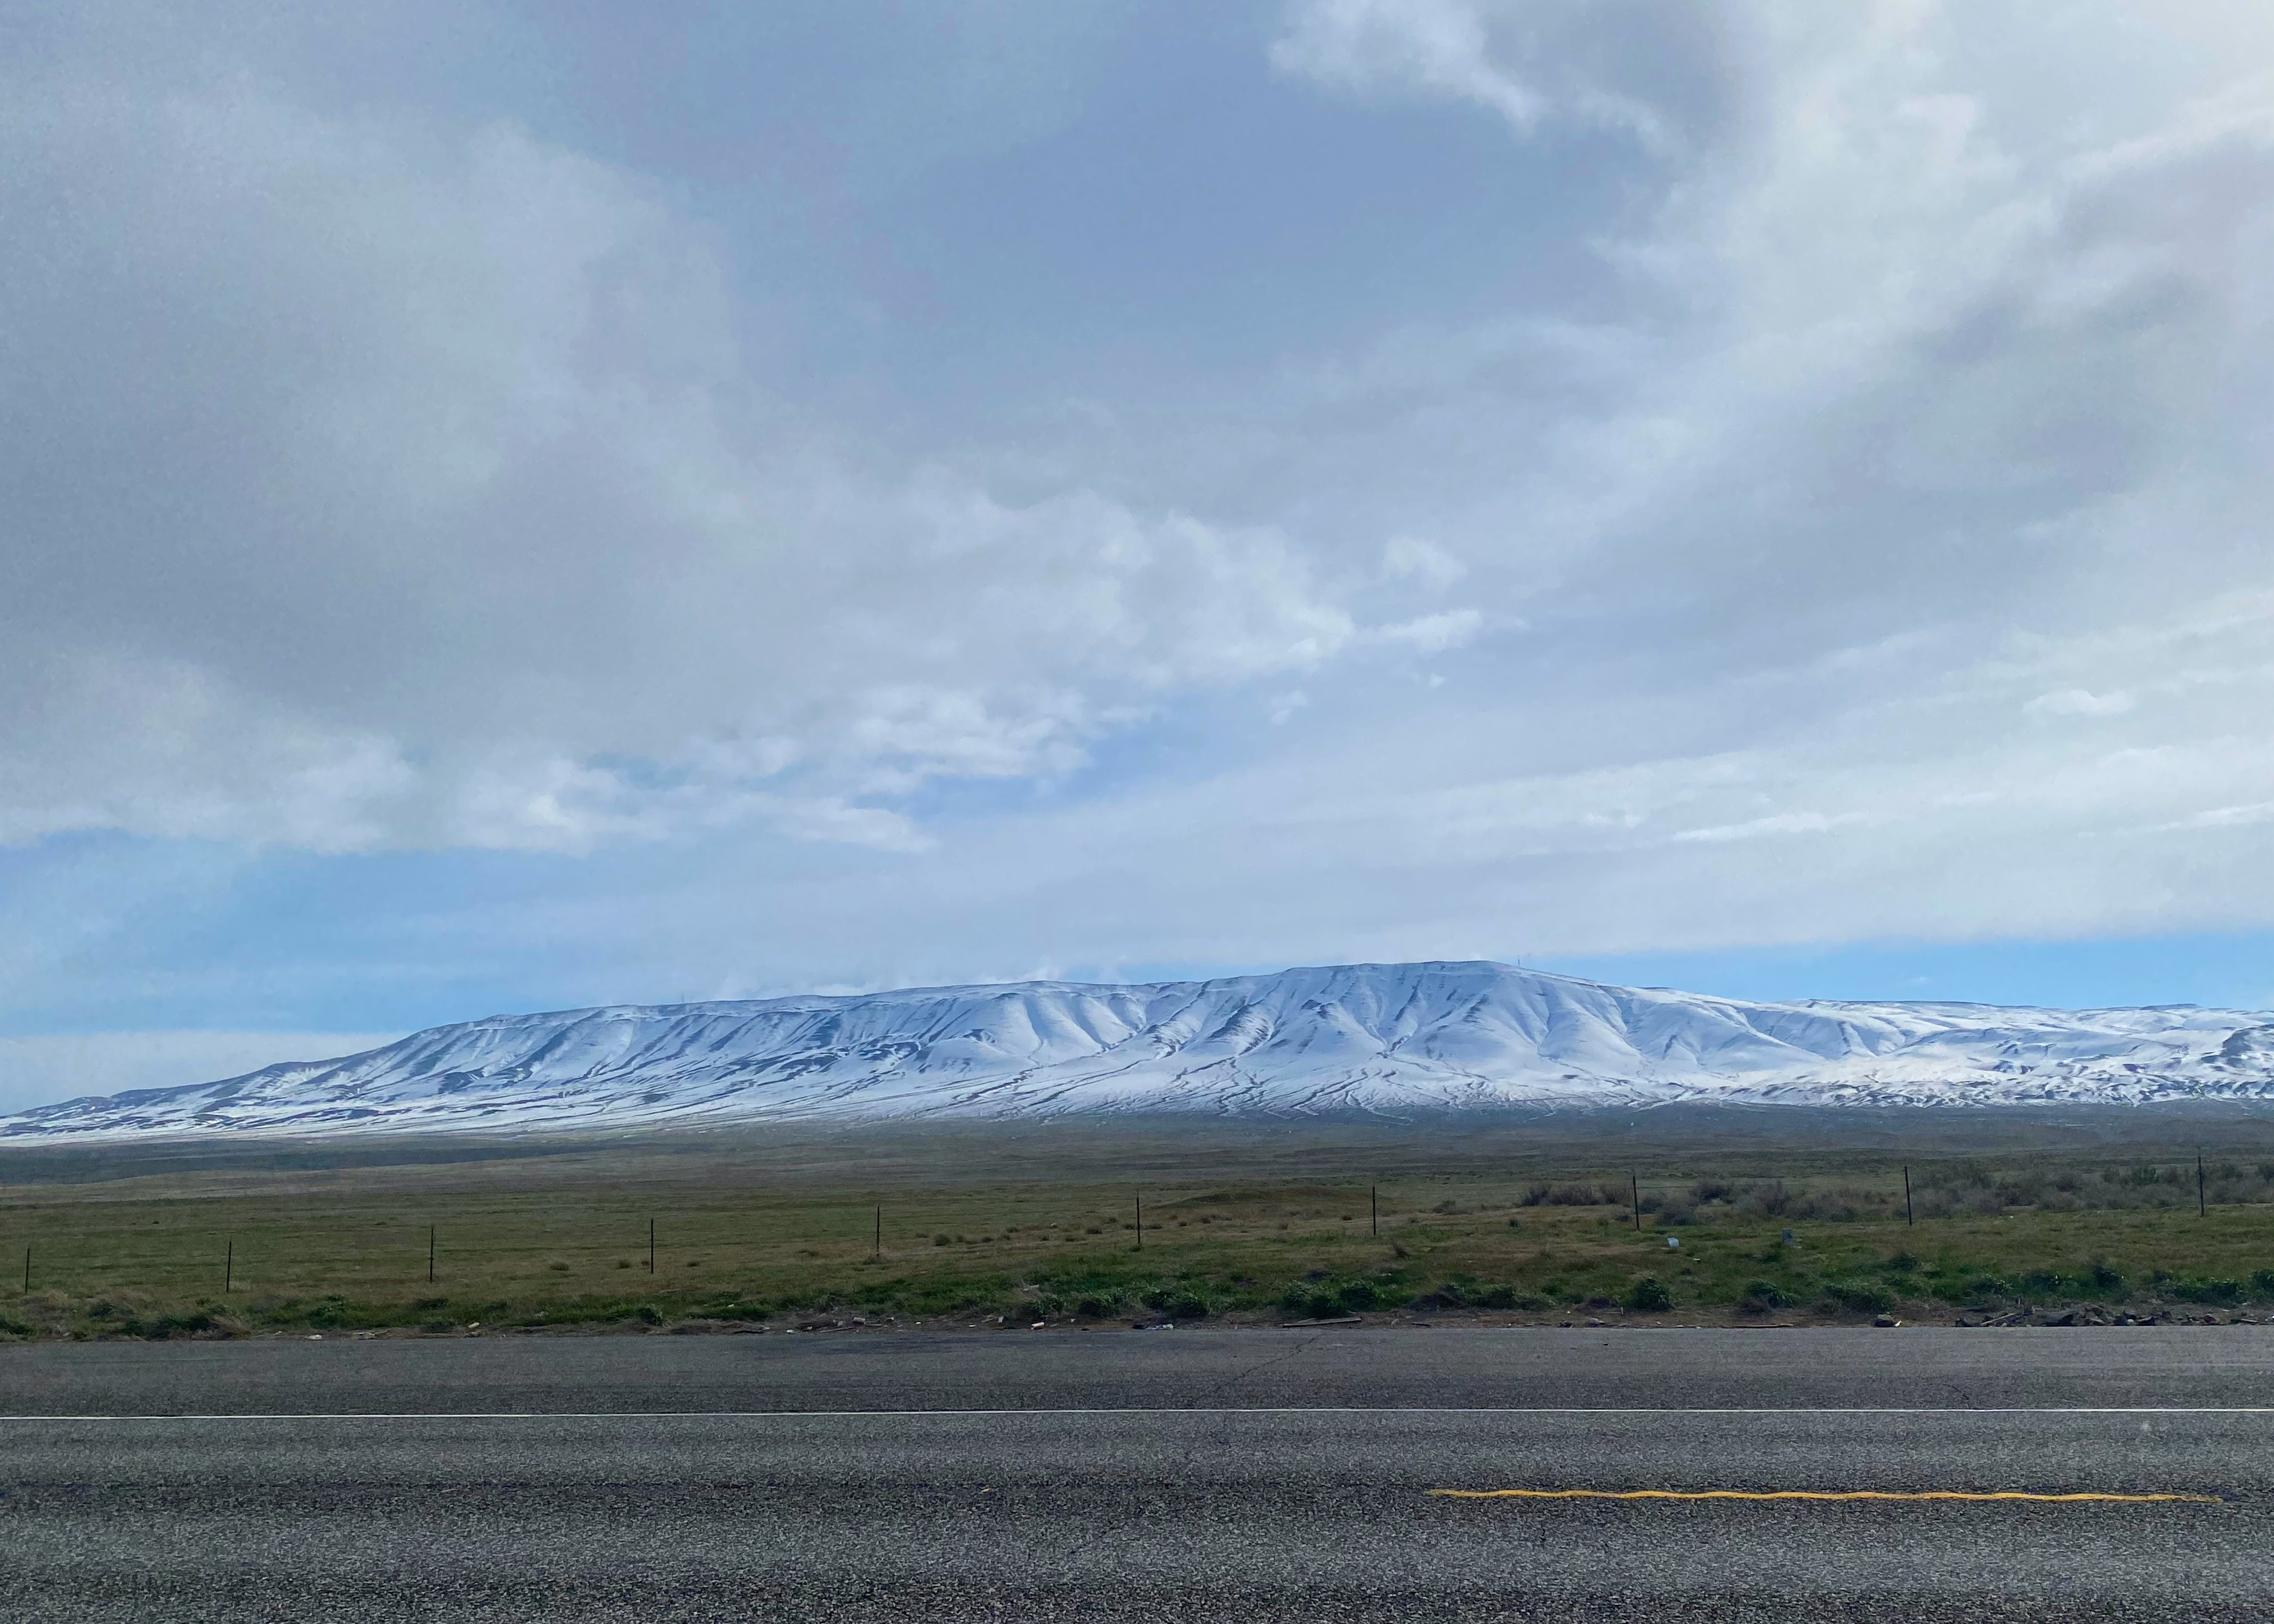 Rattlesnake Mountain, known as Laliik by Tribes of the Columbia Basin, is incredibly important to Tribal nations. Now, the Biden Administration has announced its intention to work closely with Tribes on managing and protecting the southeast Washington mountain.